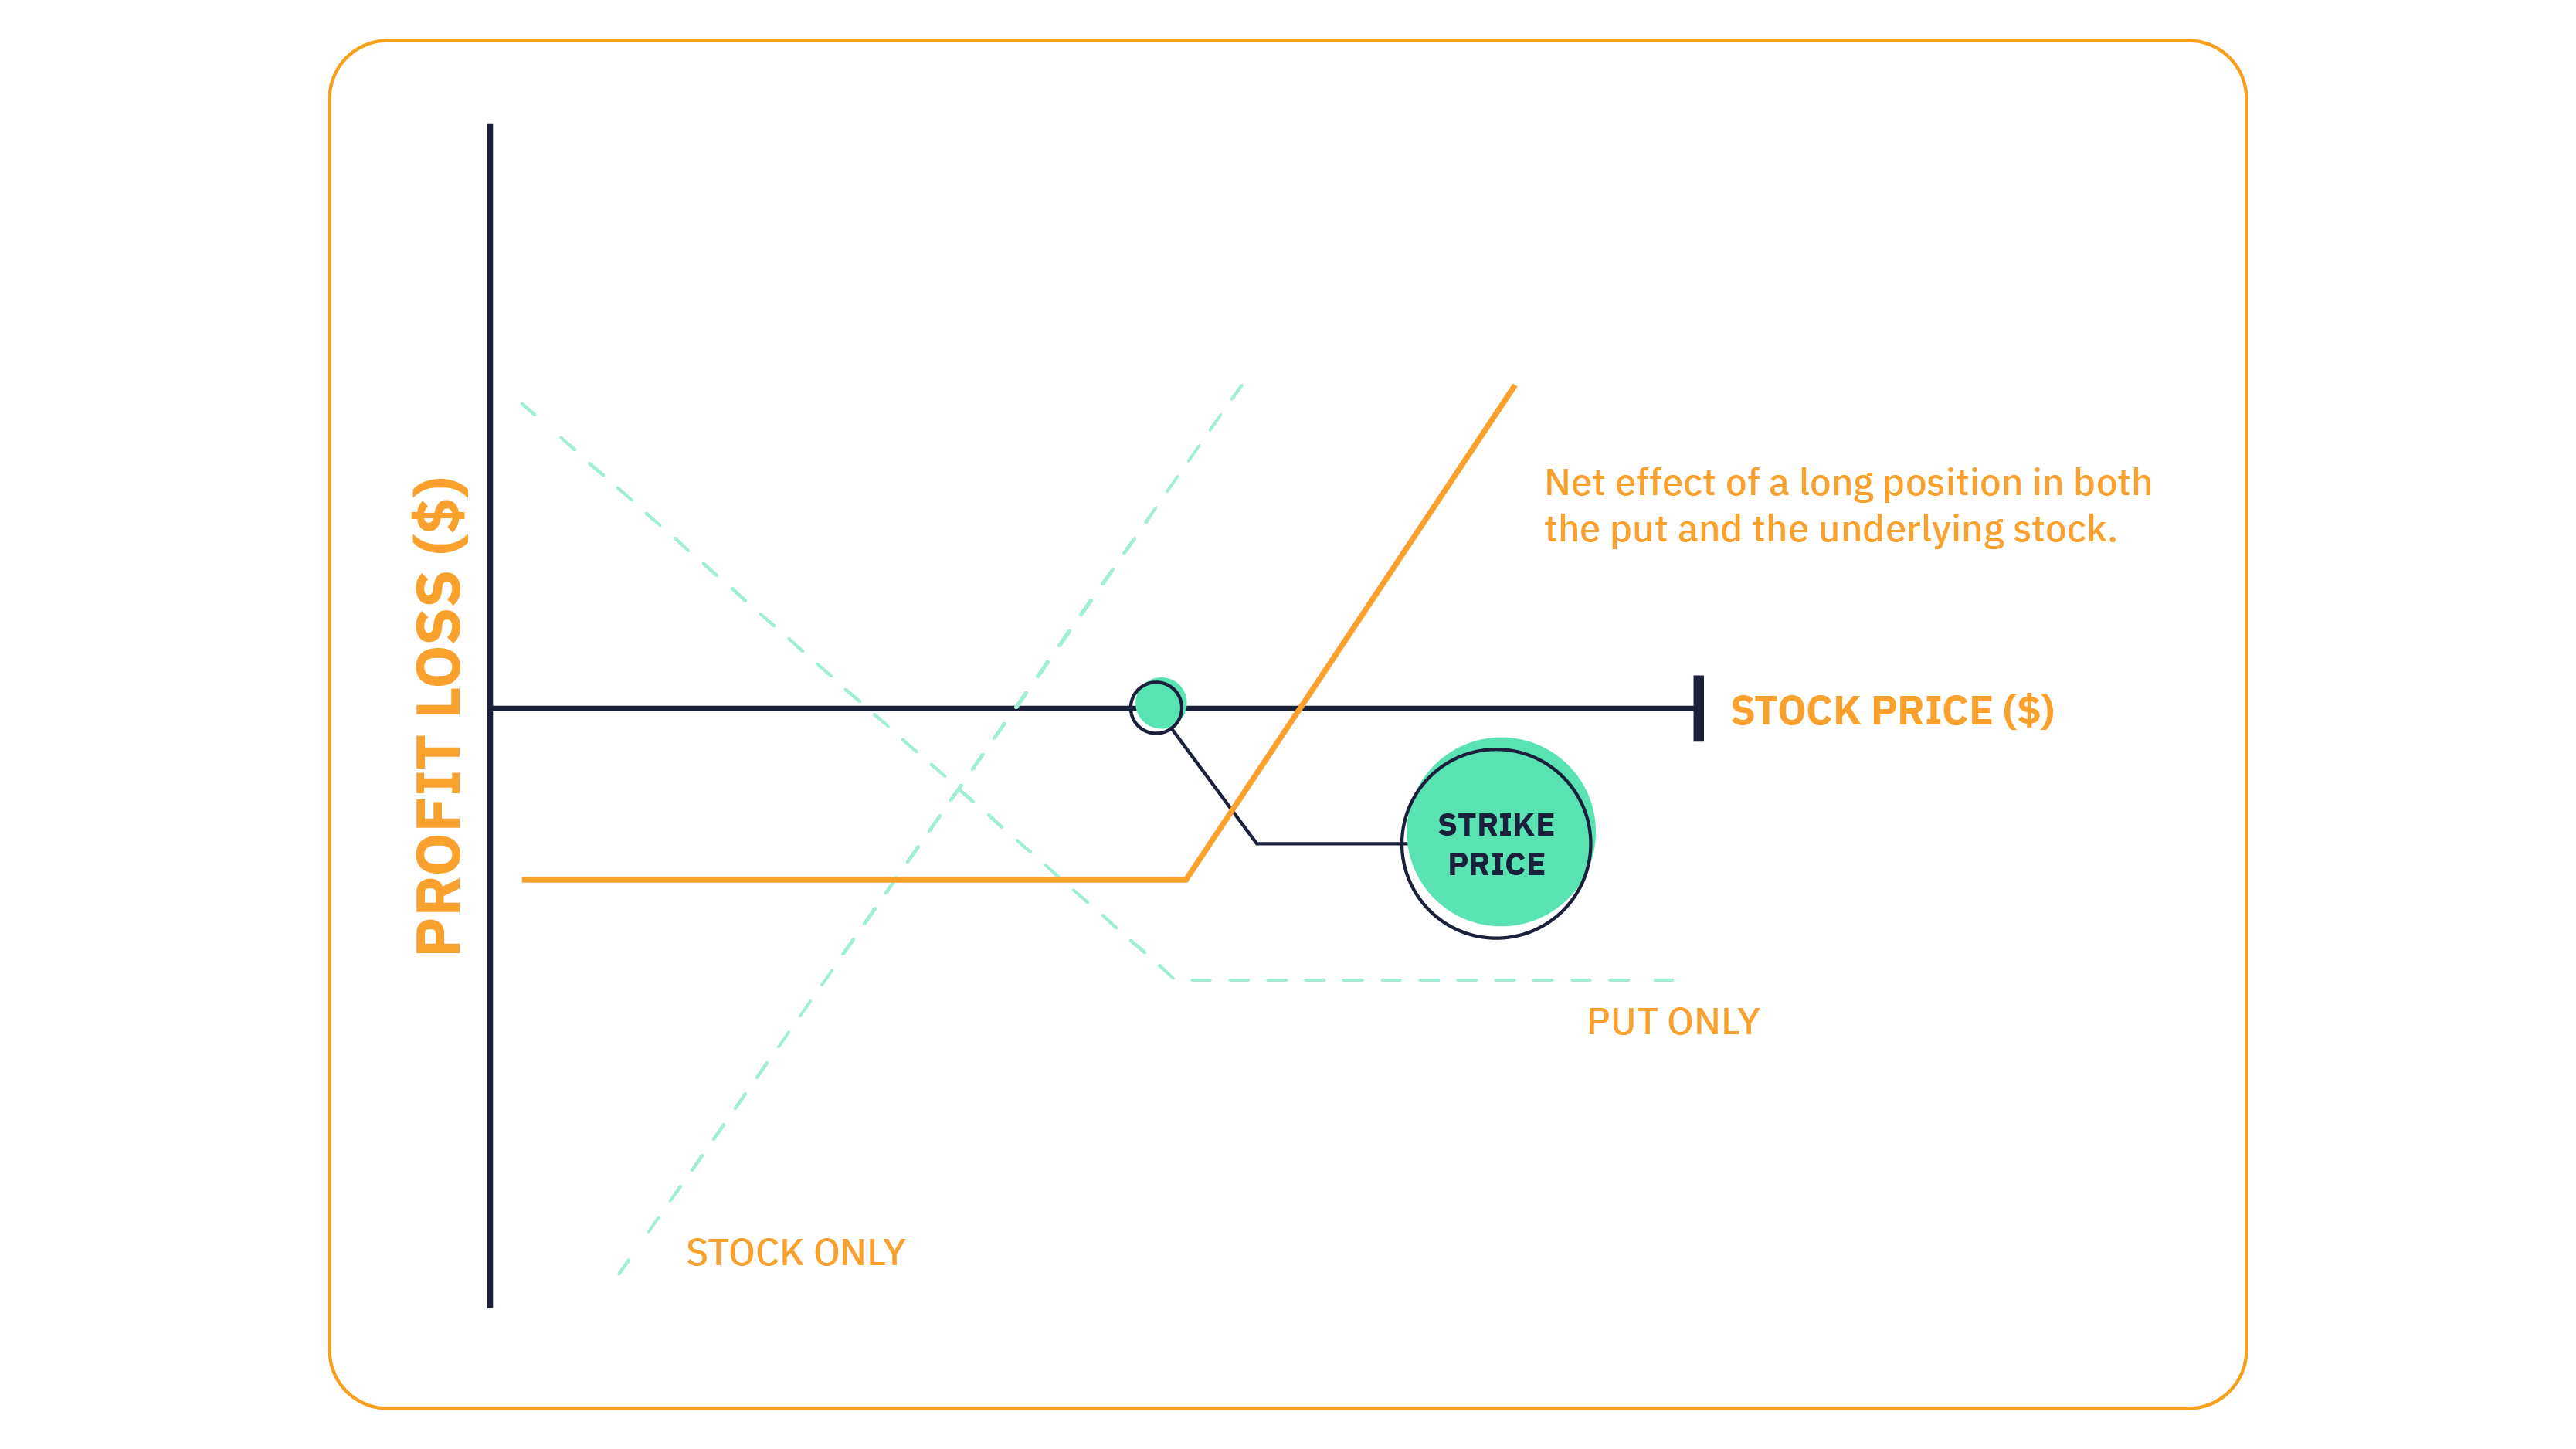 married put payoff diagram